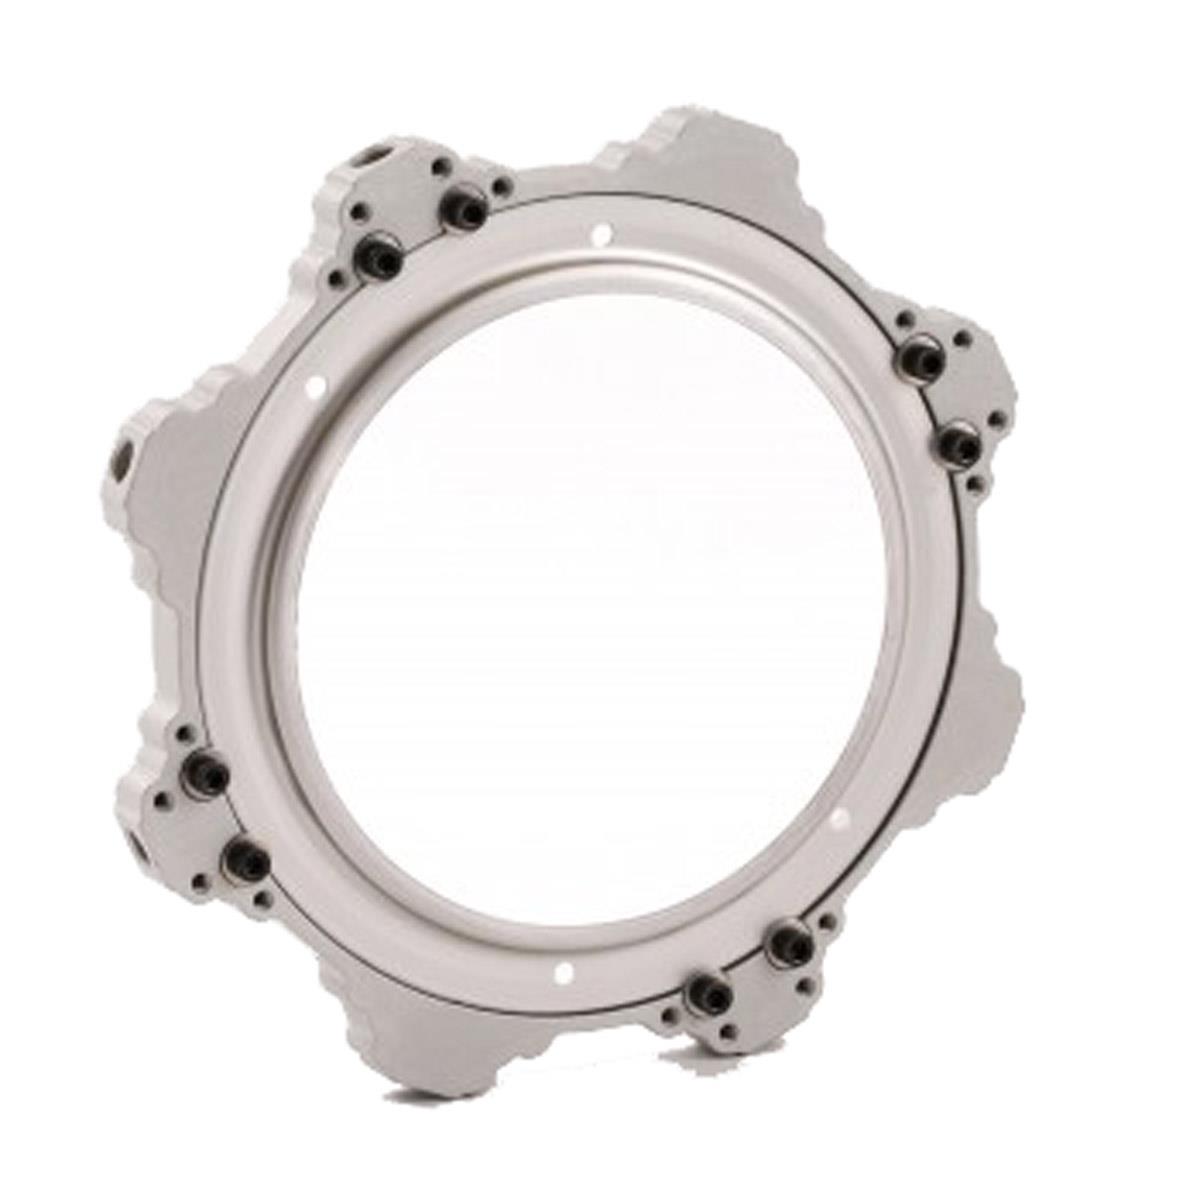 Image of Chimera Octaplus Speed Ring for Hedler &quot;H&quot; Series Light Fixture